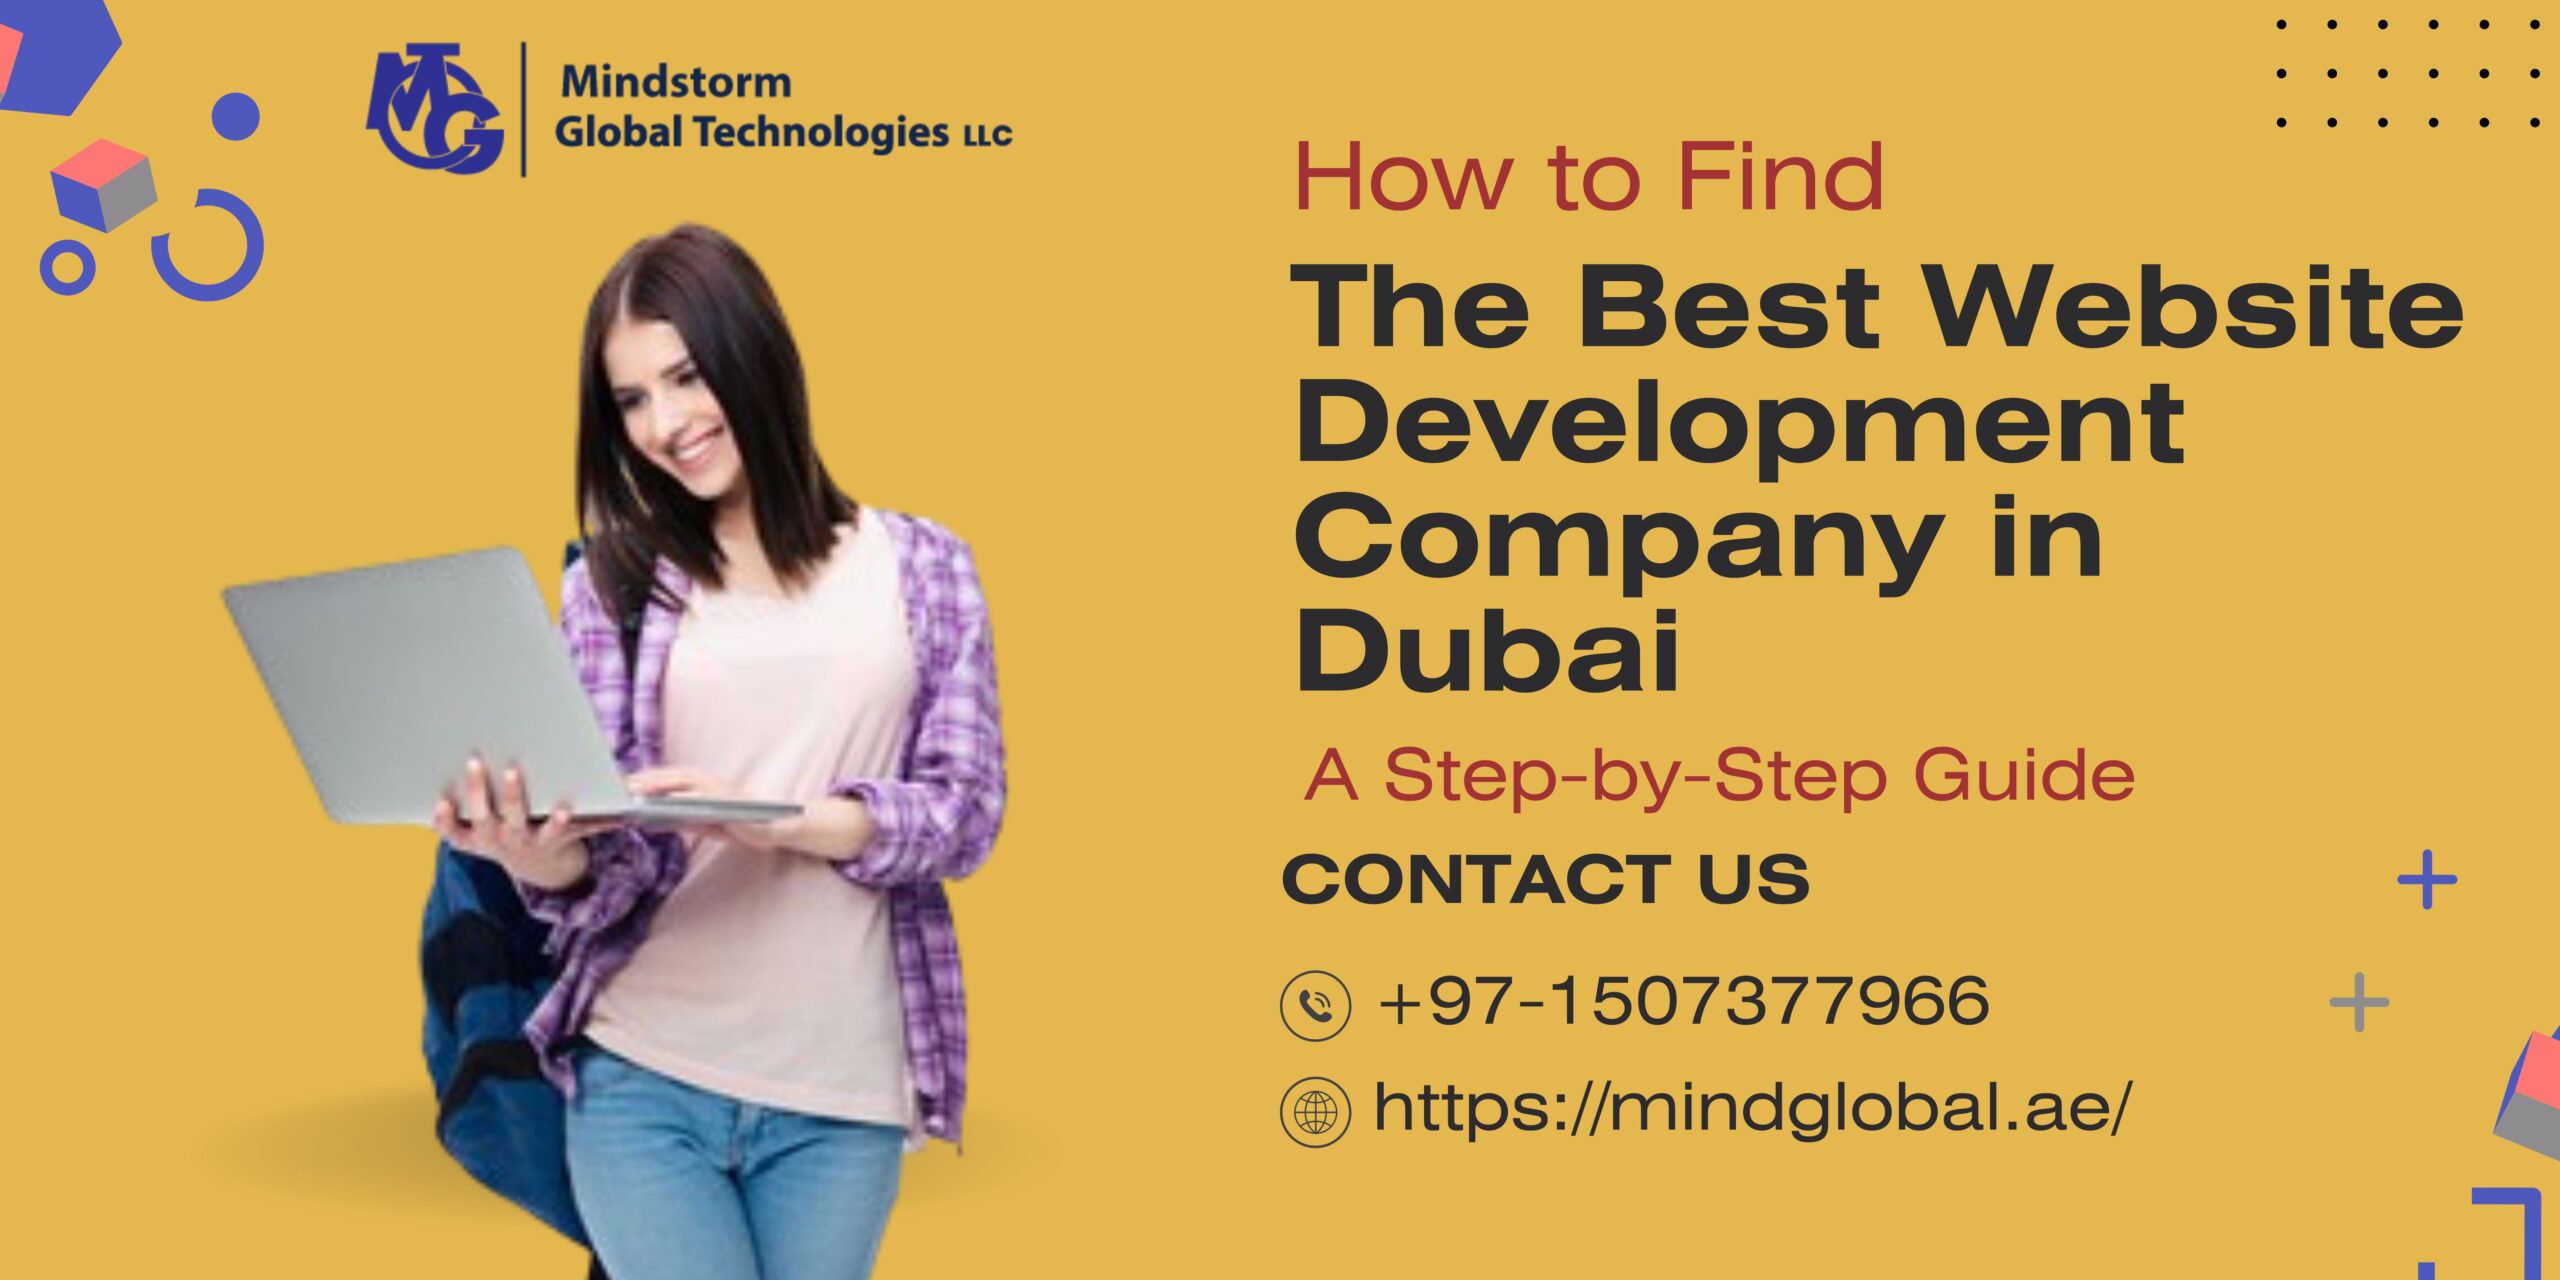 How to Find the Best Website Development Company in Dubai: A Step-by-Step Guide